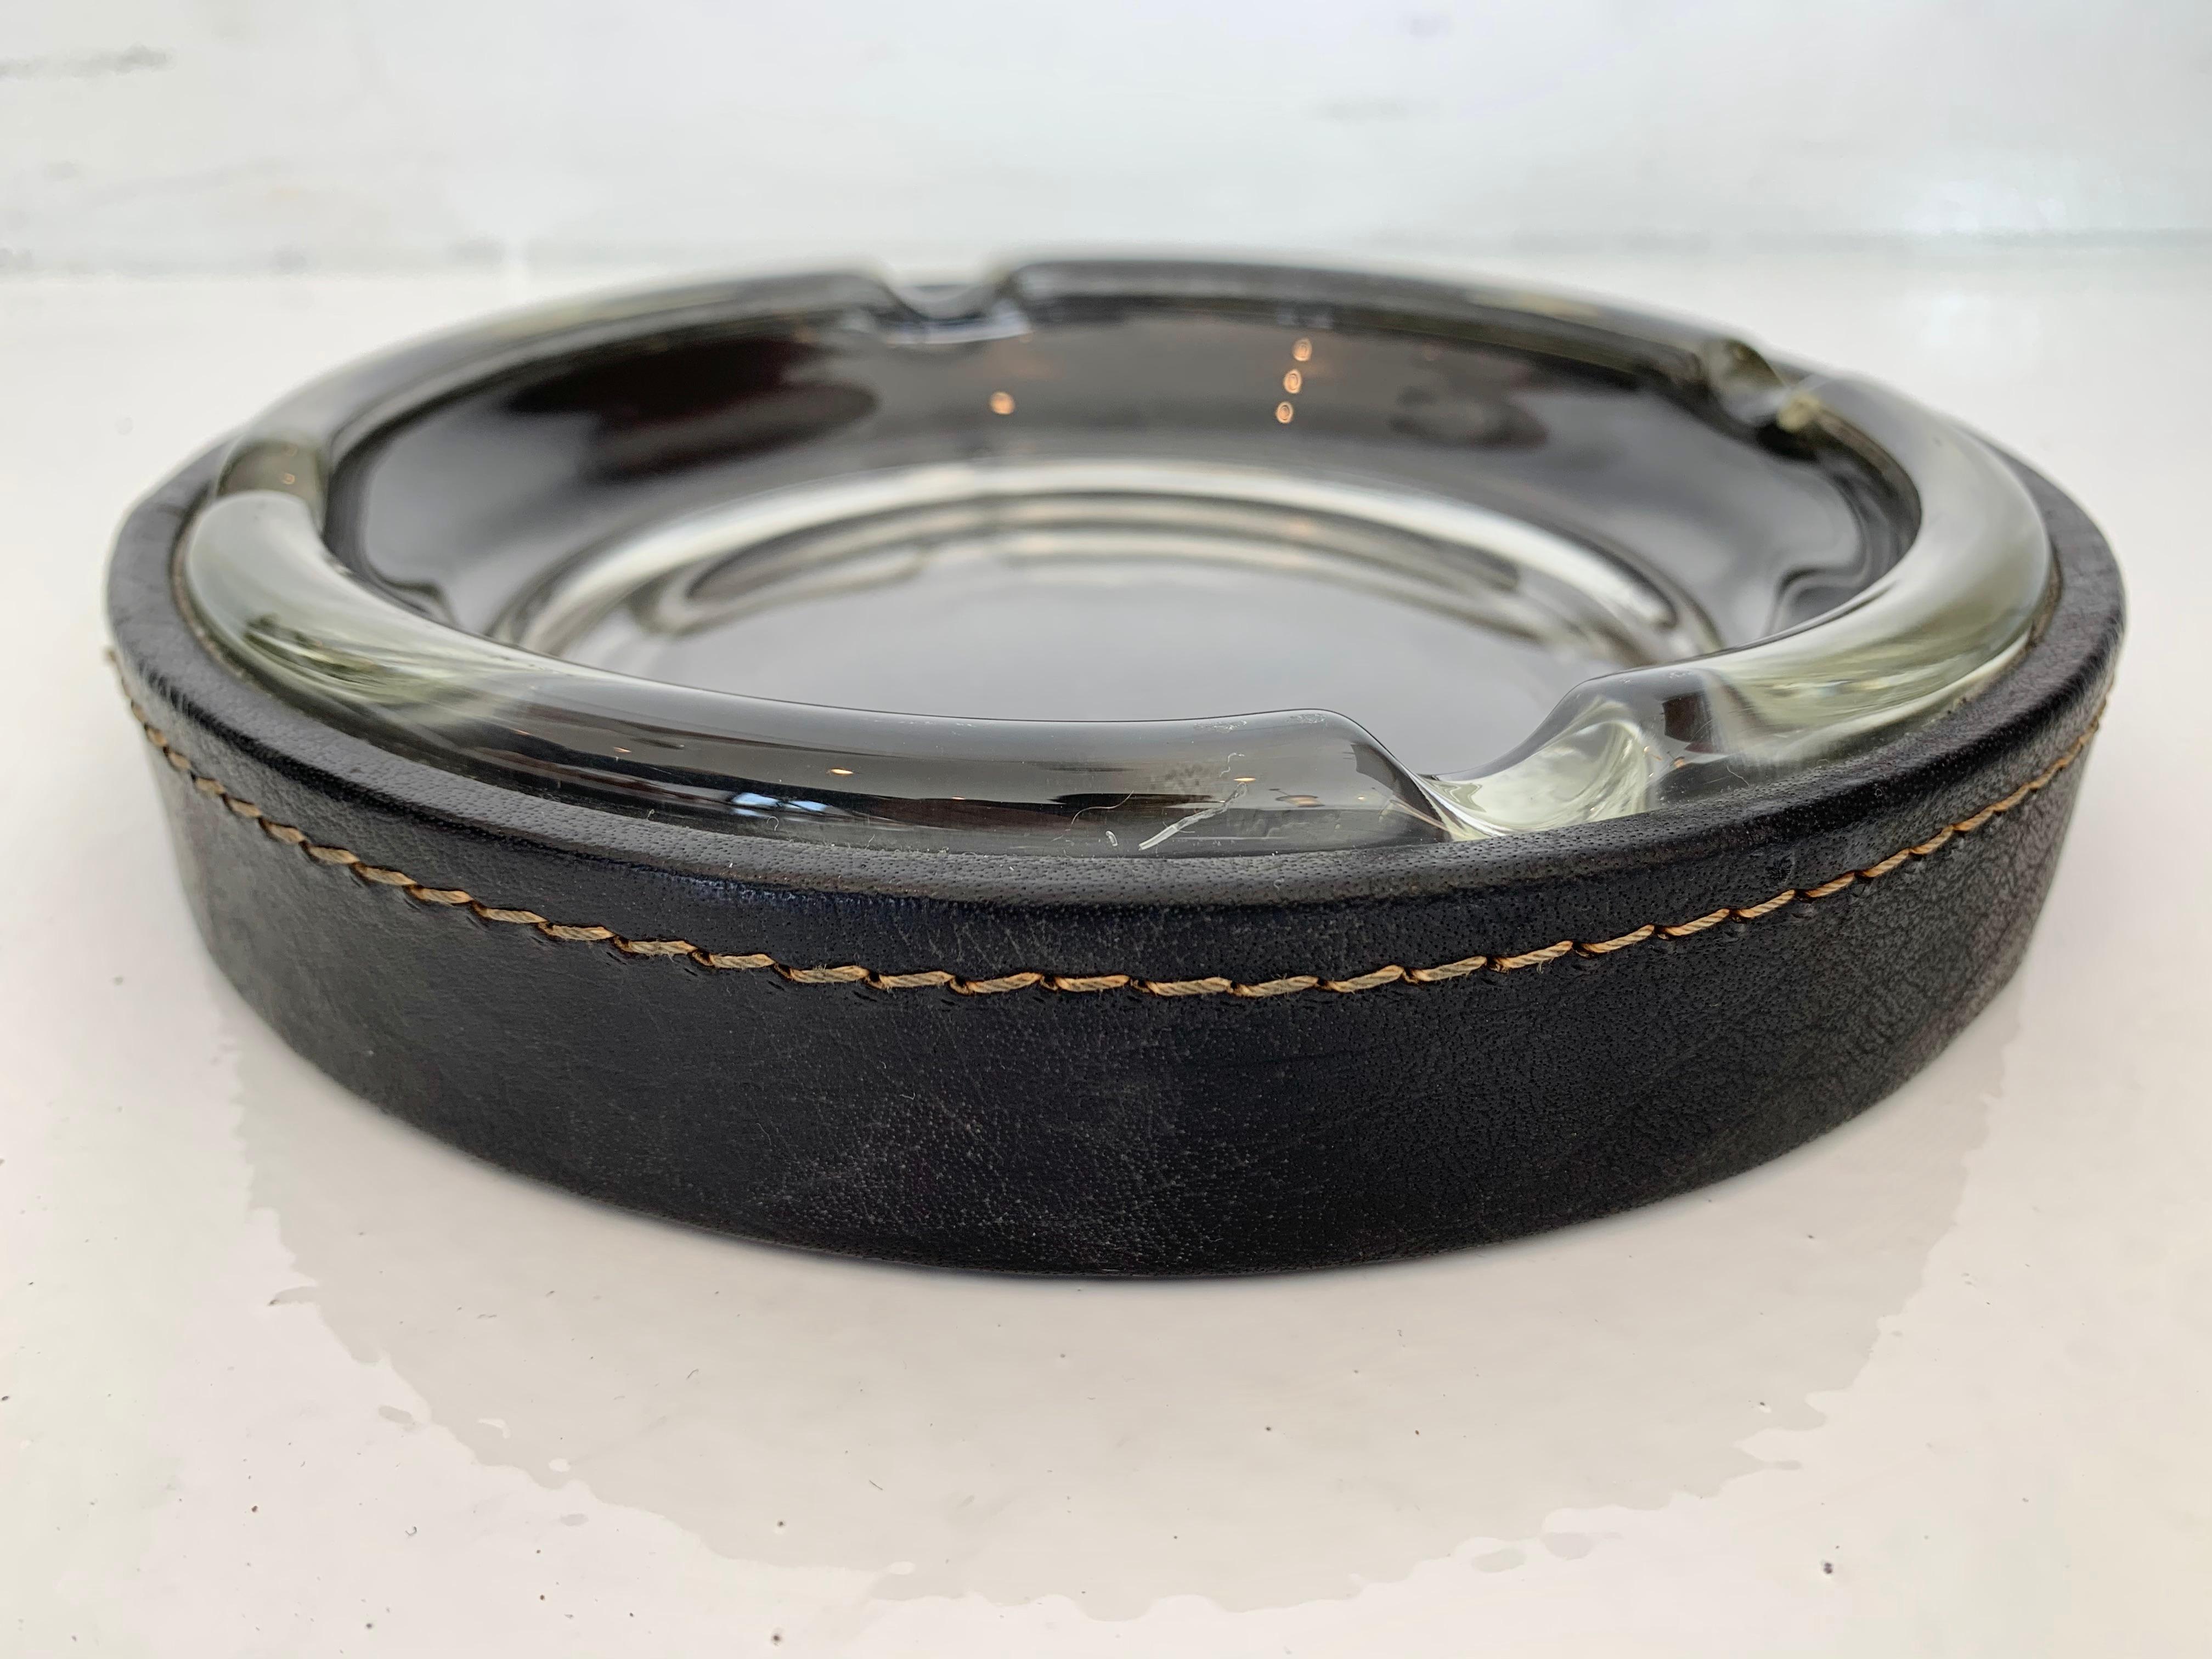 Handsome oversized black leather and glass ashtray / catchall in the style of Jacques Adnet. Contrast stitching throughout. Inset glass. Great desktop ashtray or catchall to put by the front door. Good vintage condition.